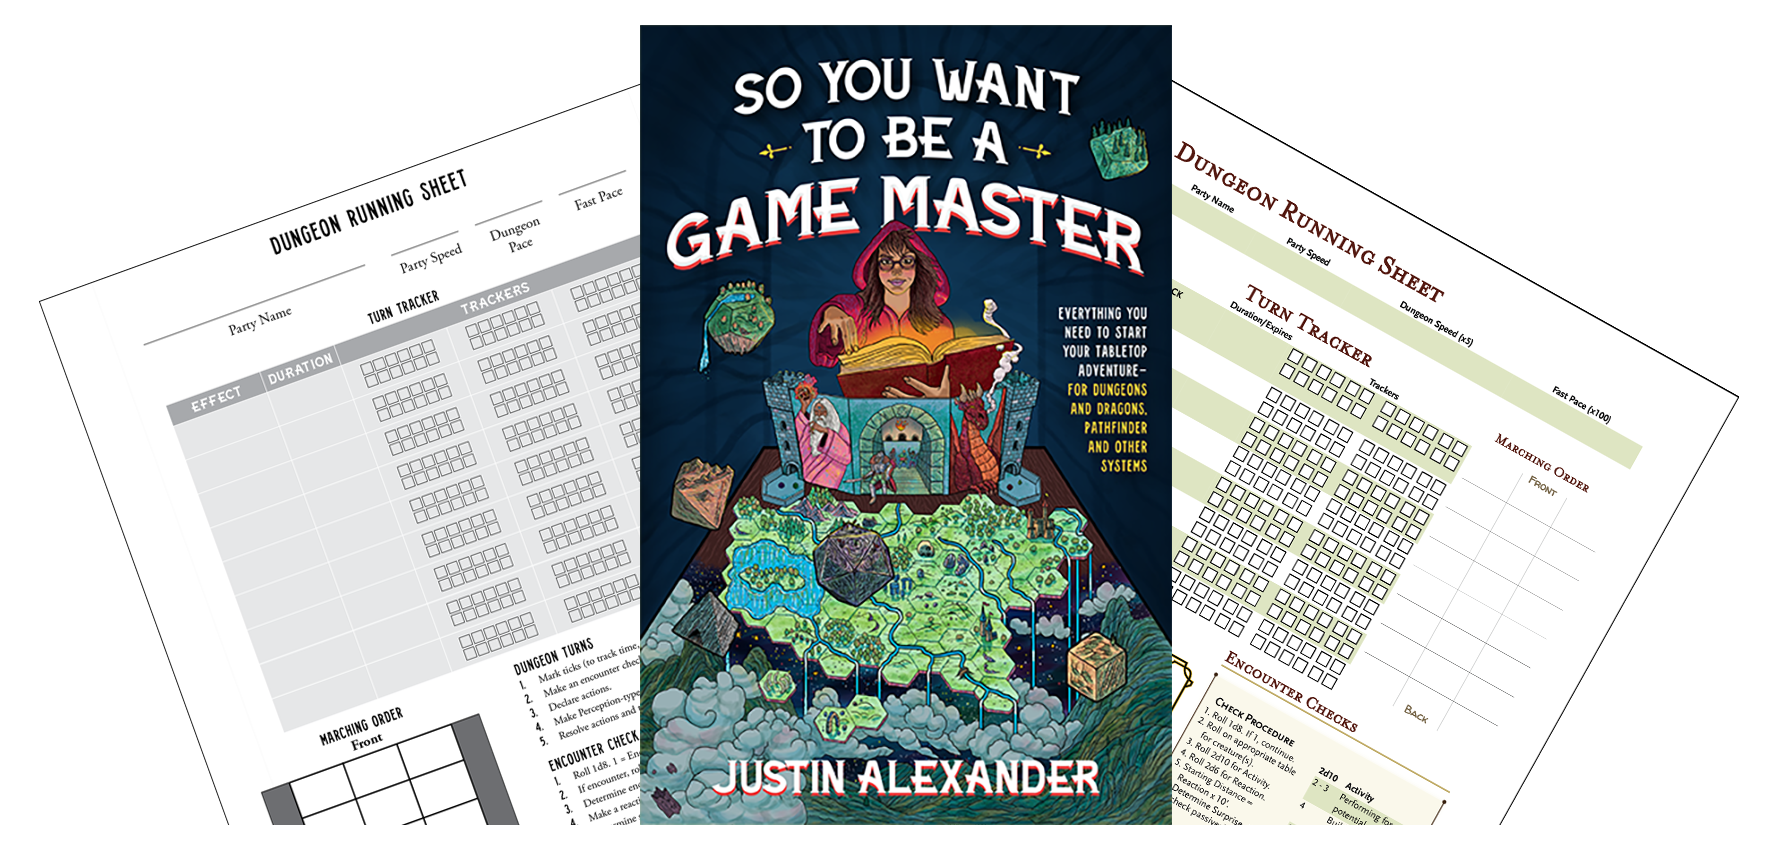 So You Want To Be a Game Master - Dungeon Running Sheets